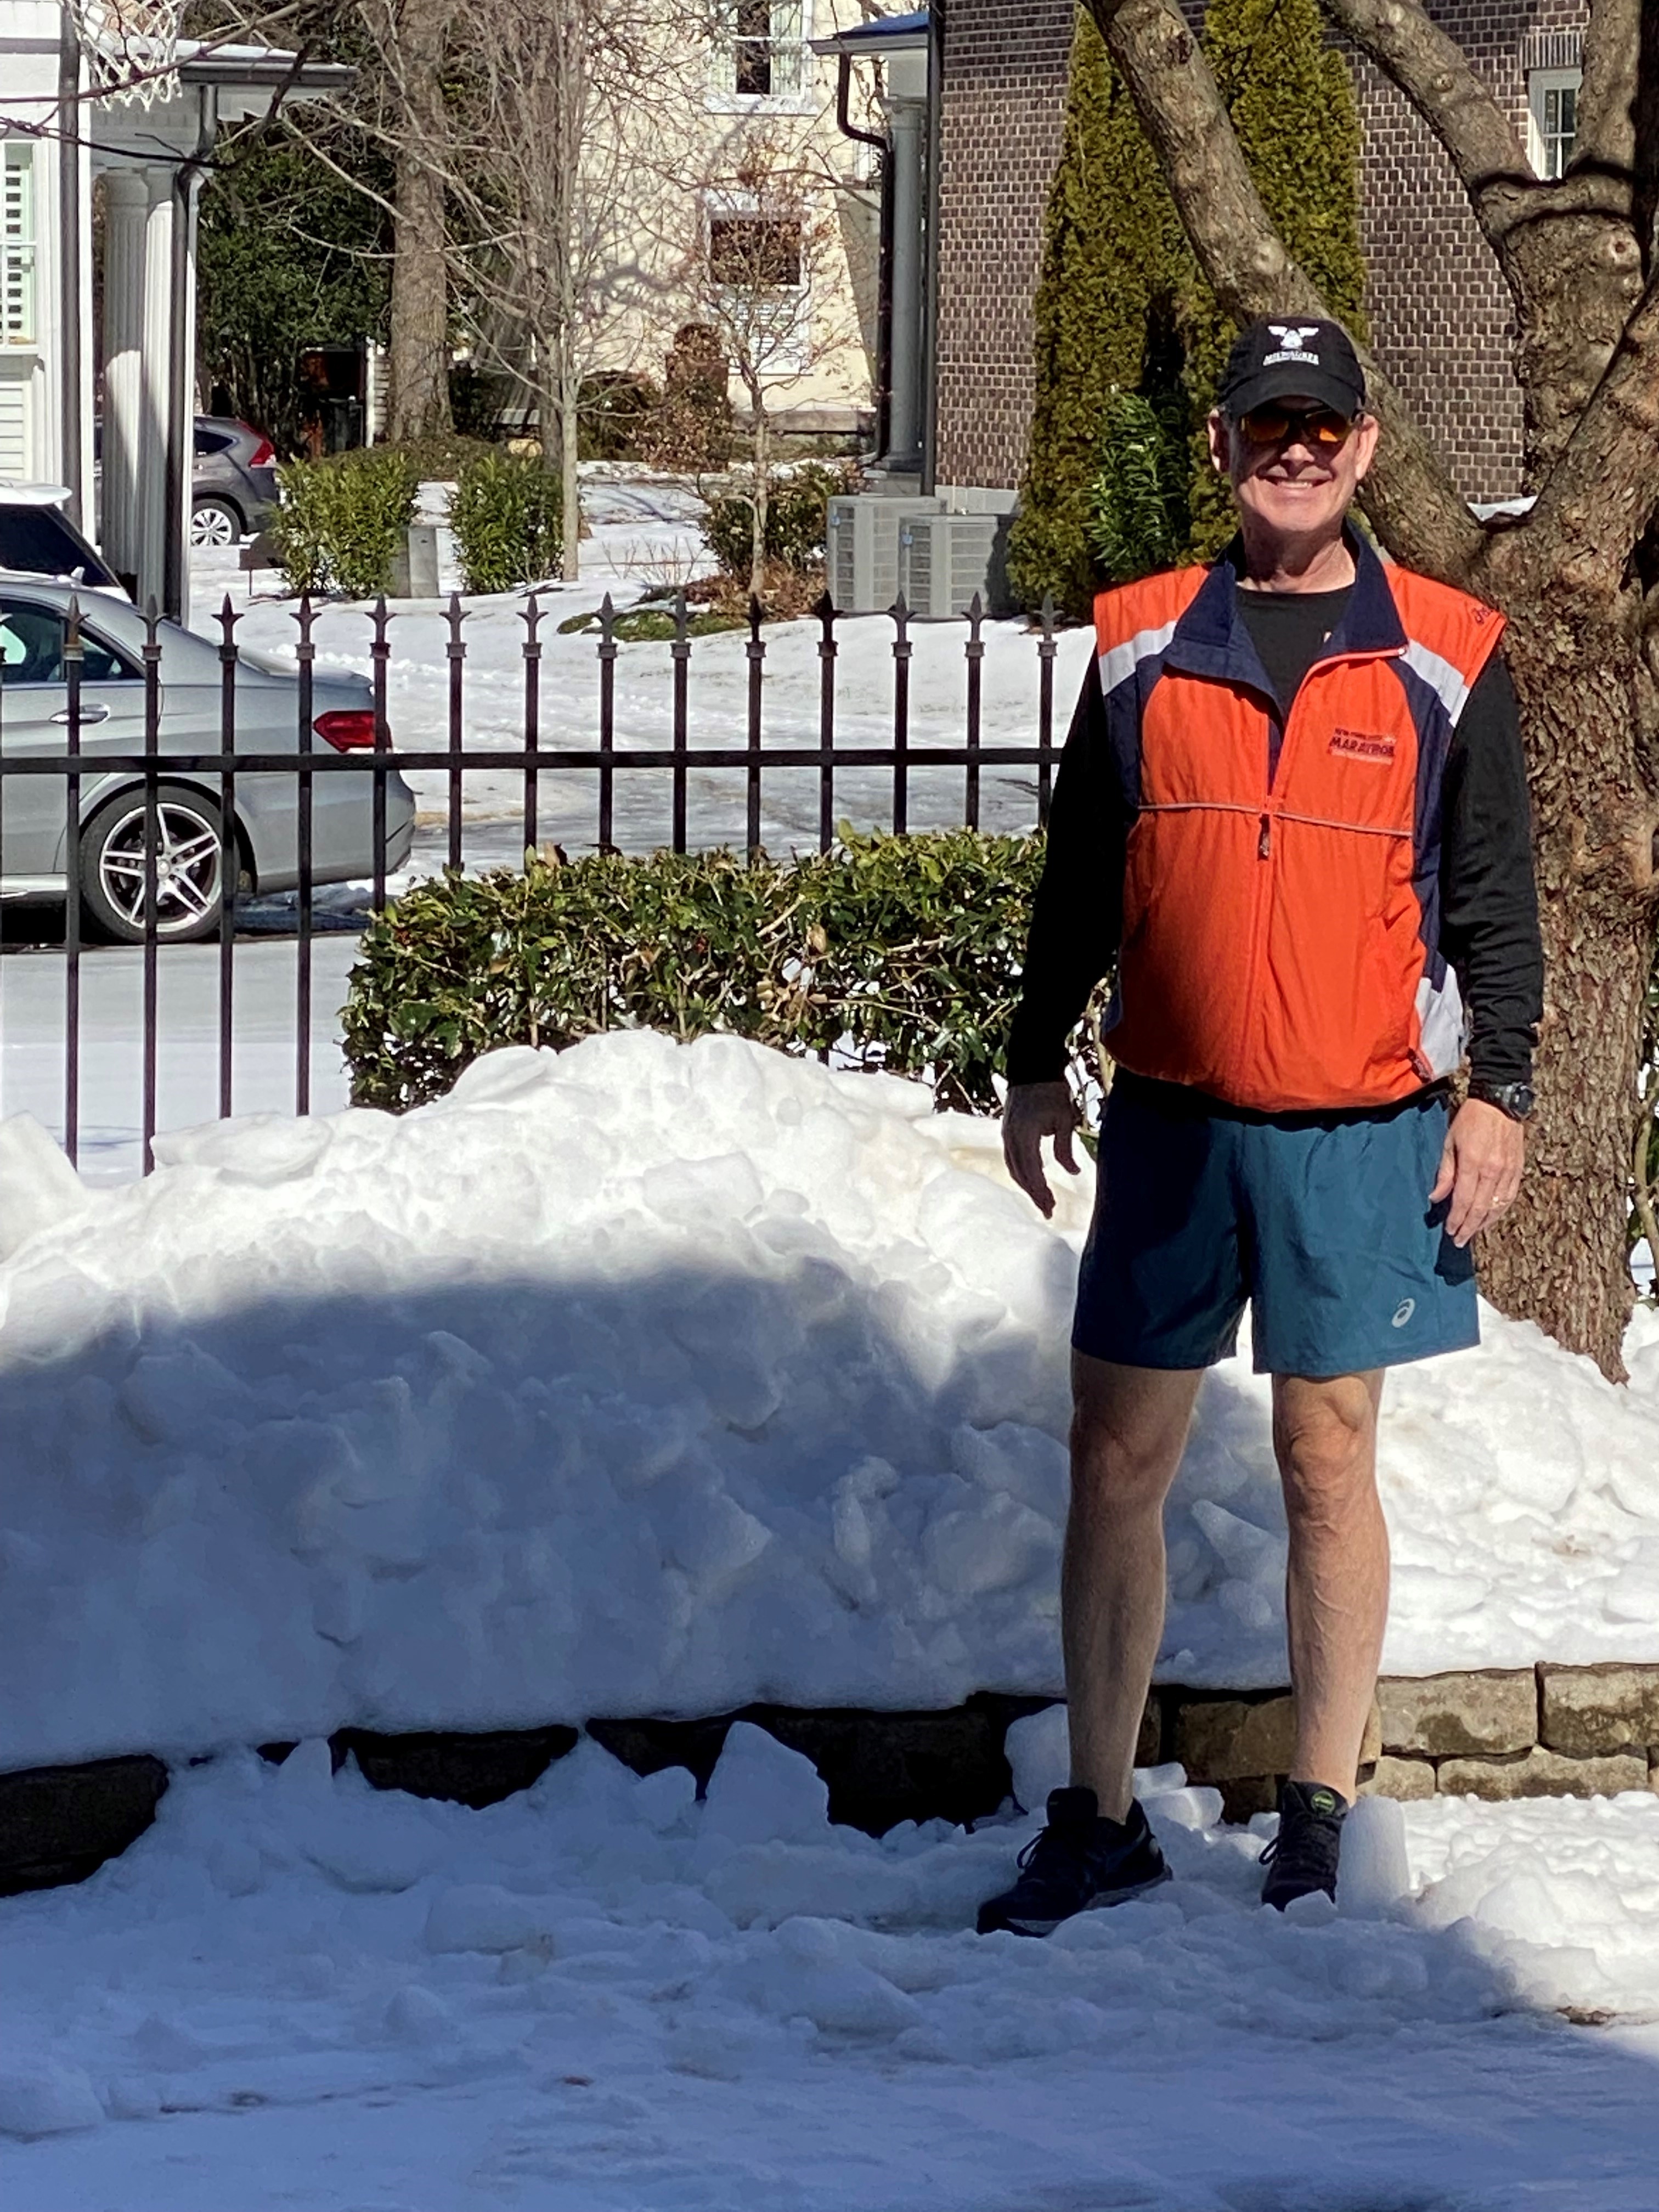 An avid long-distance runner, Marc Dedman is pictured about to set out on a 10-mile trek through snow-lined streets.